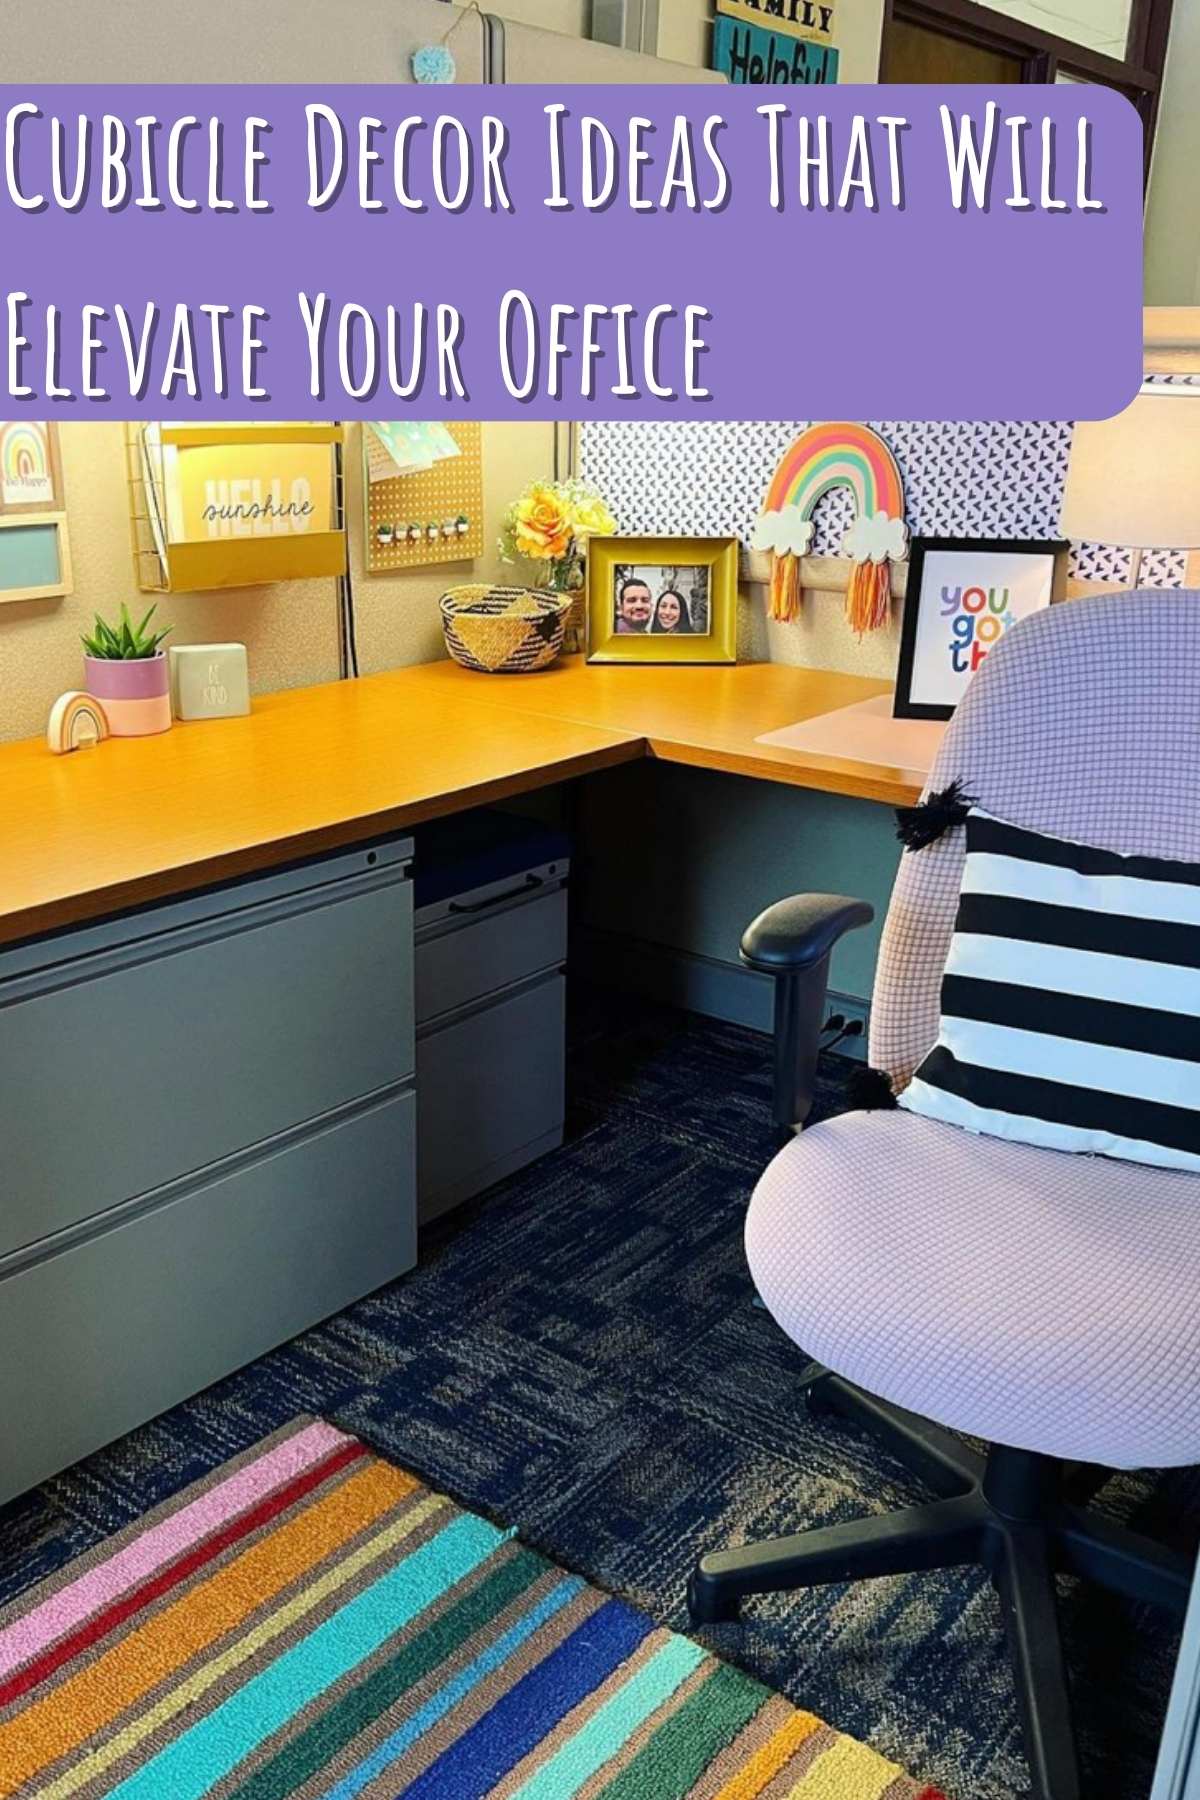 Cubicle Decor ideas that will elevate your office. Colorful office idea.